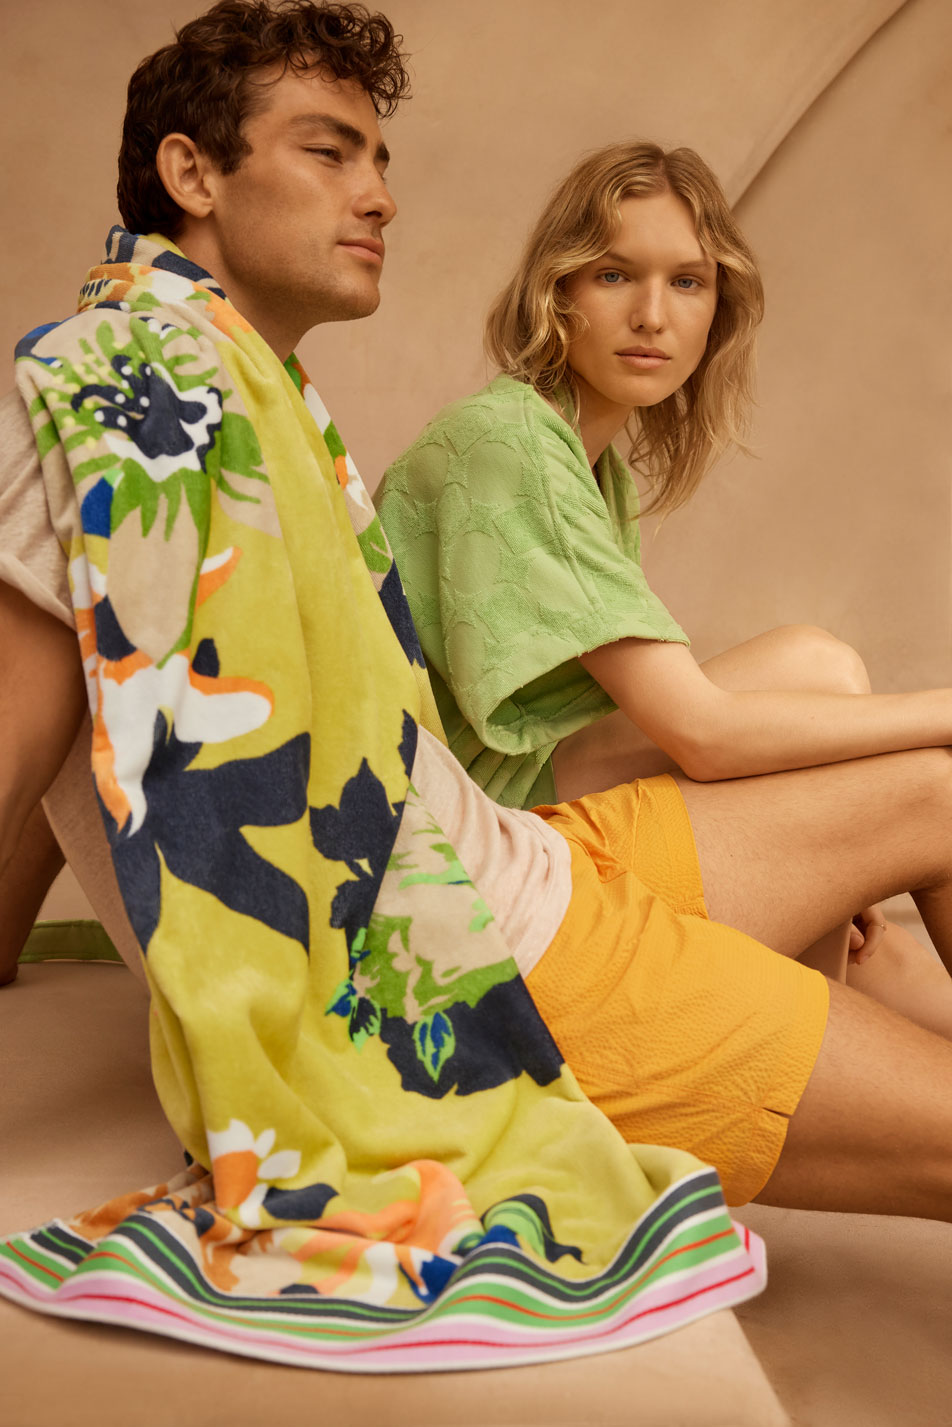 A young brunette man and blonde woman sit side-by-side wearing summer clothing. The man has a bright patterned beach towel draped over his shoulder.